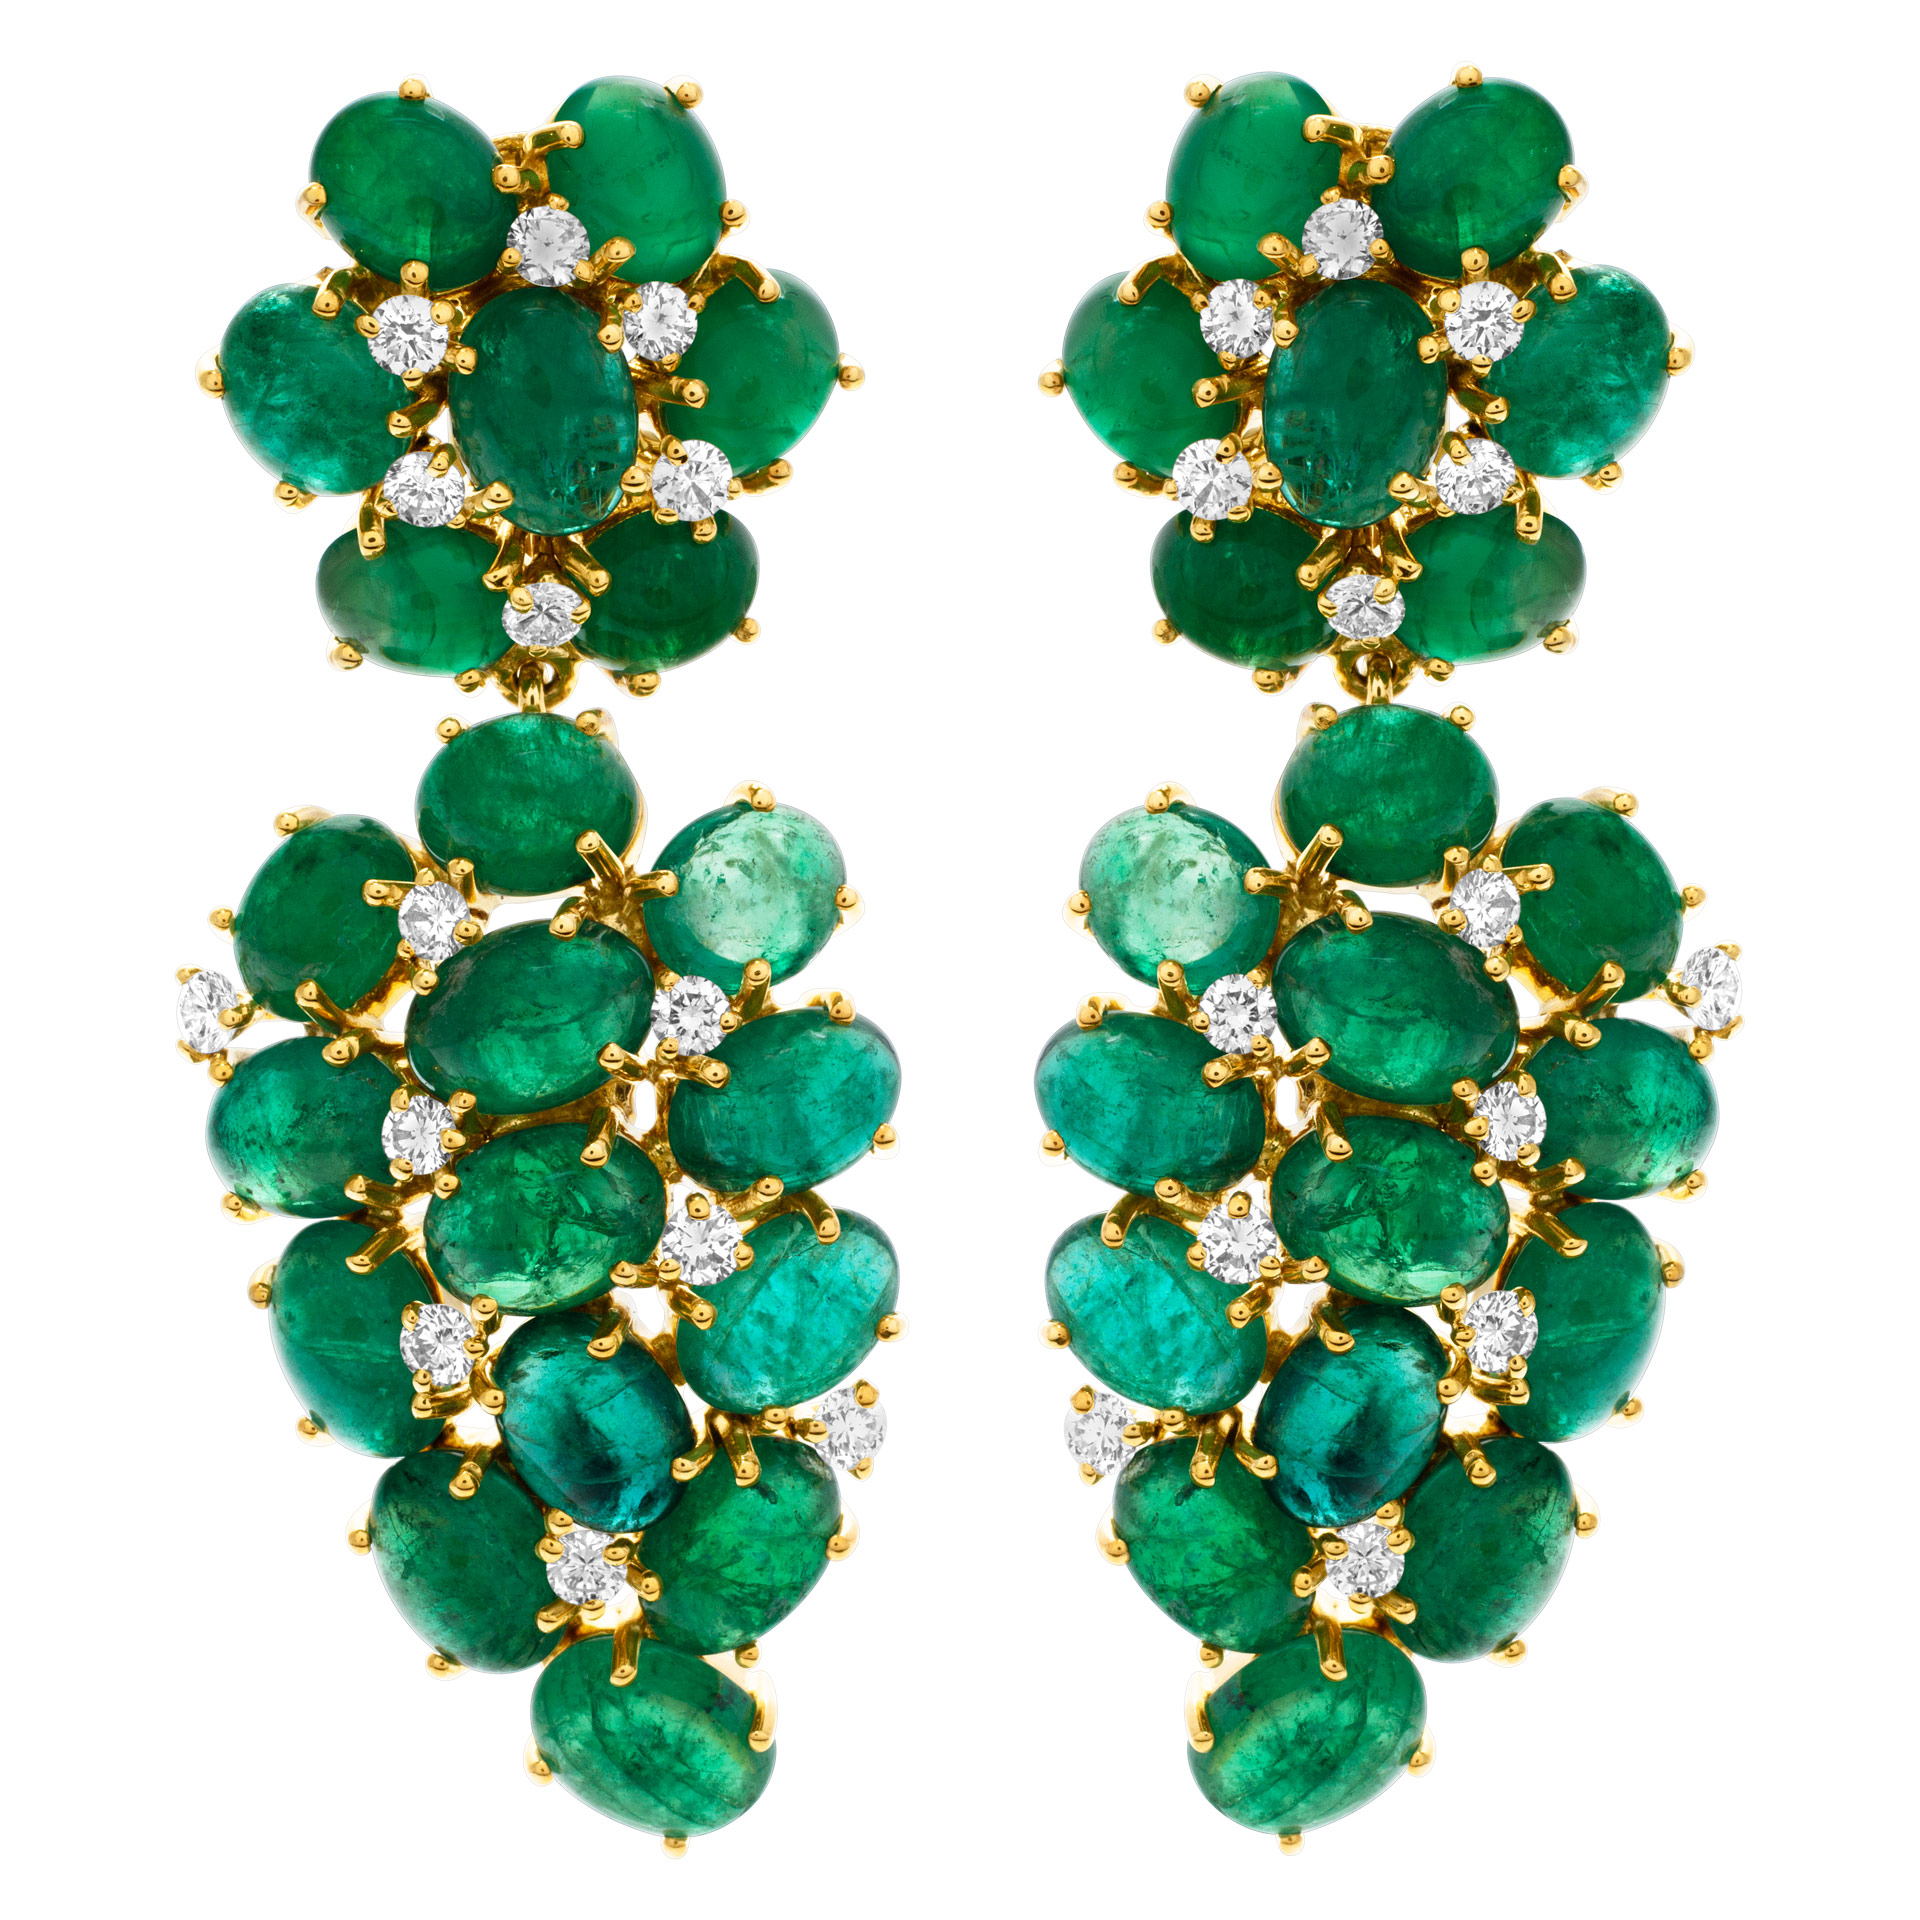 Zambian earrings with 1.31 carats in round cut diamonds and 30.66 carats in emeralds set in 18k gold